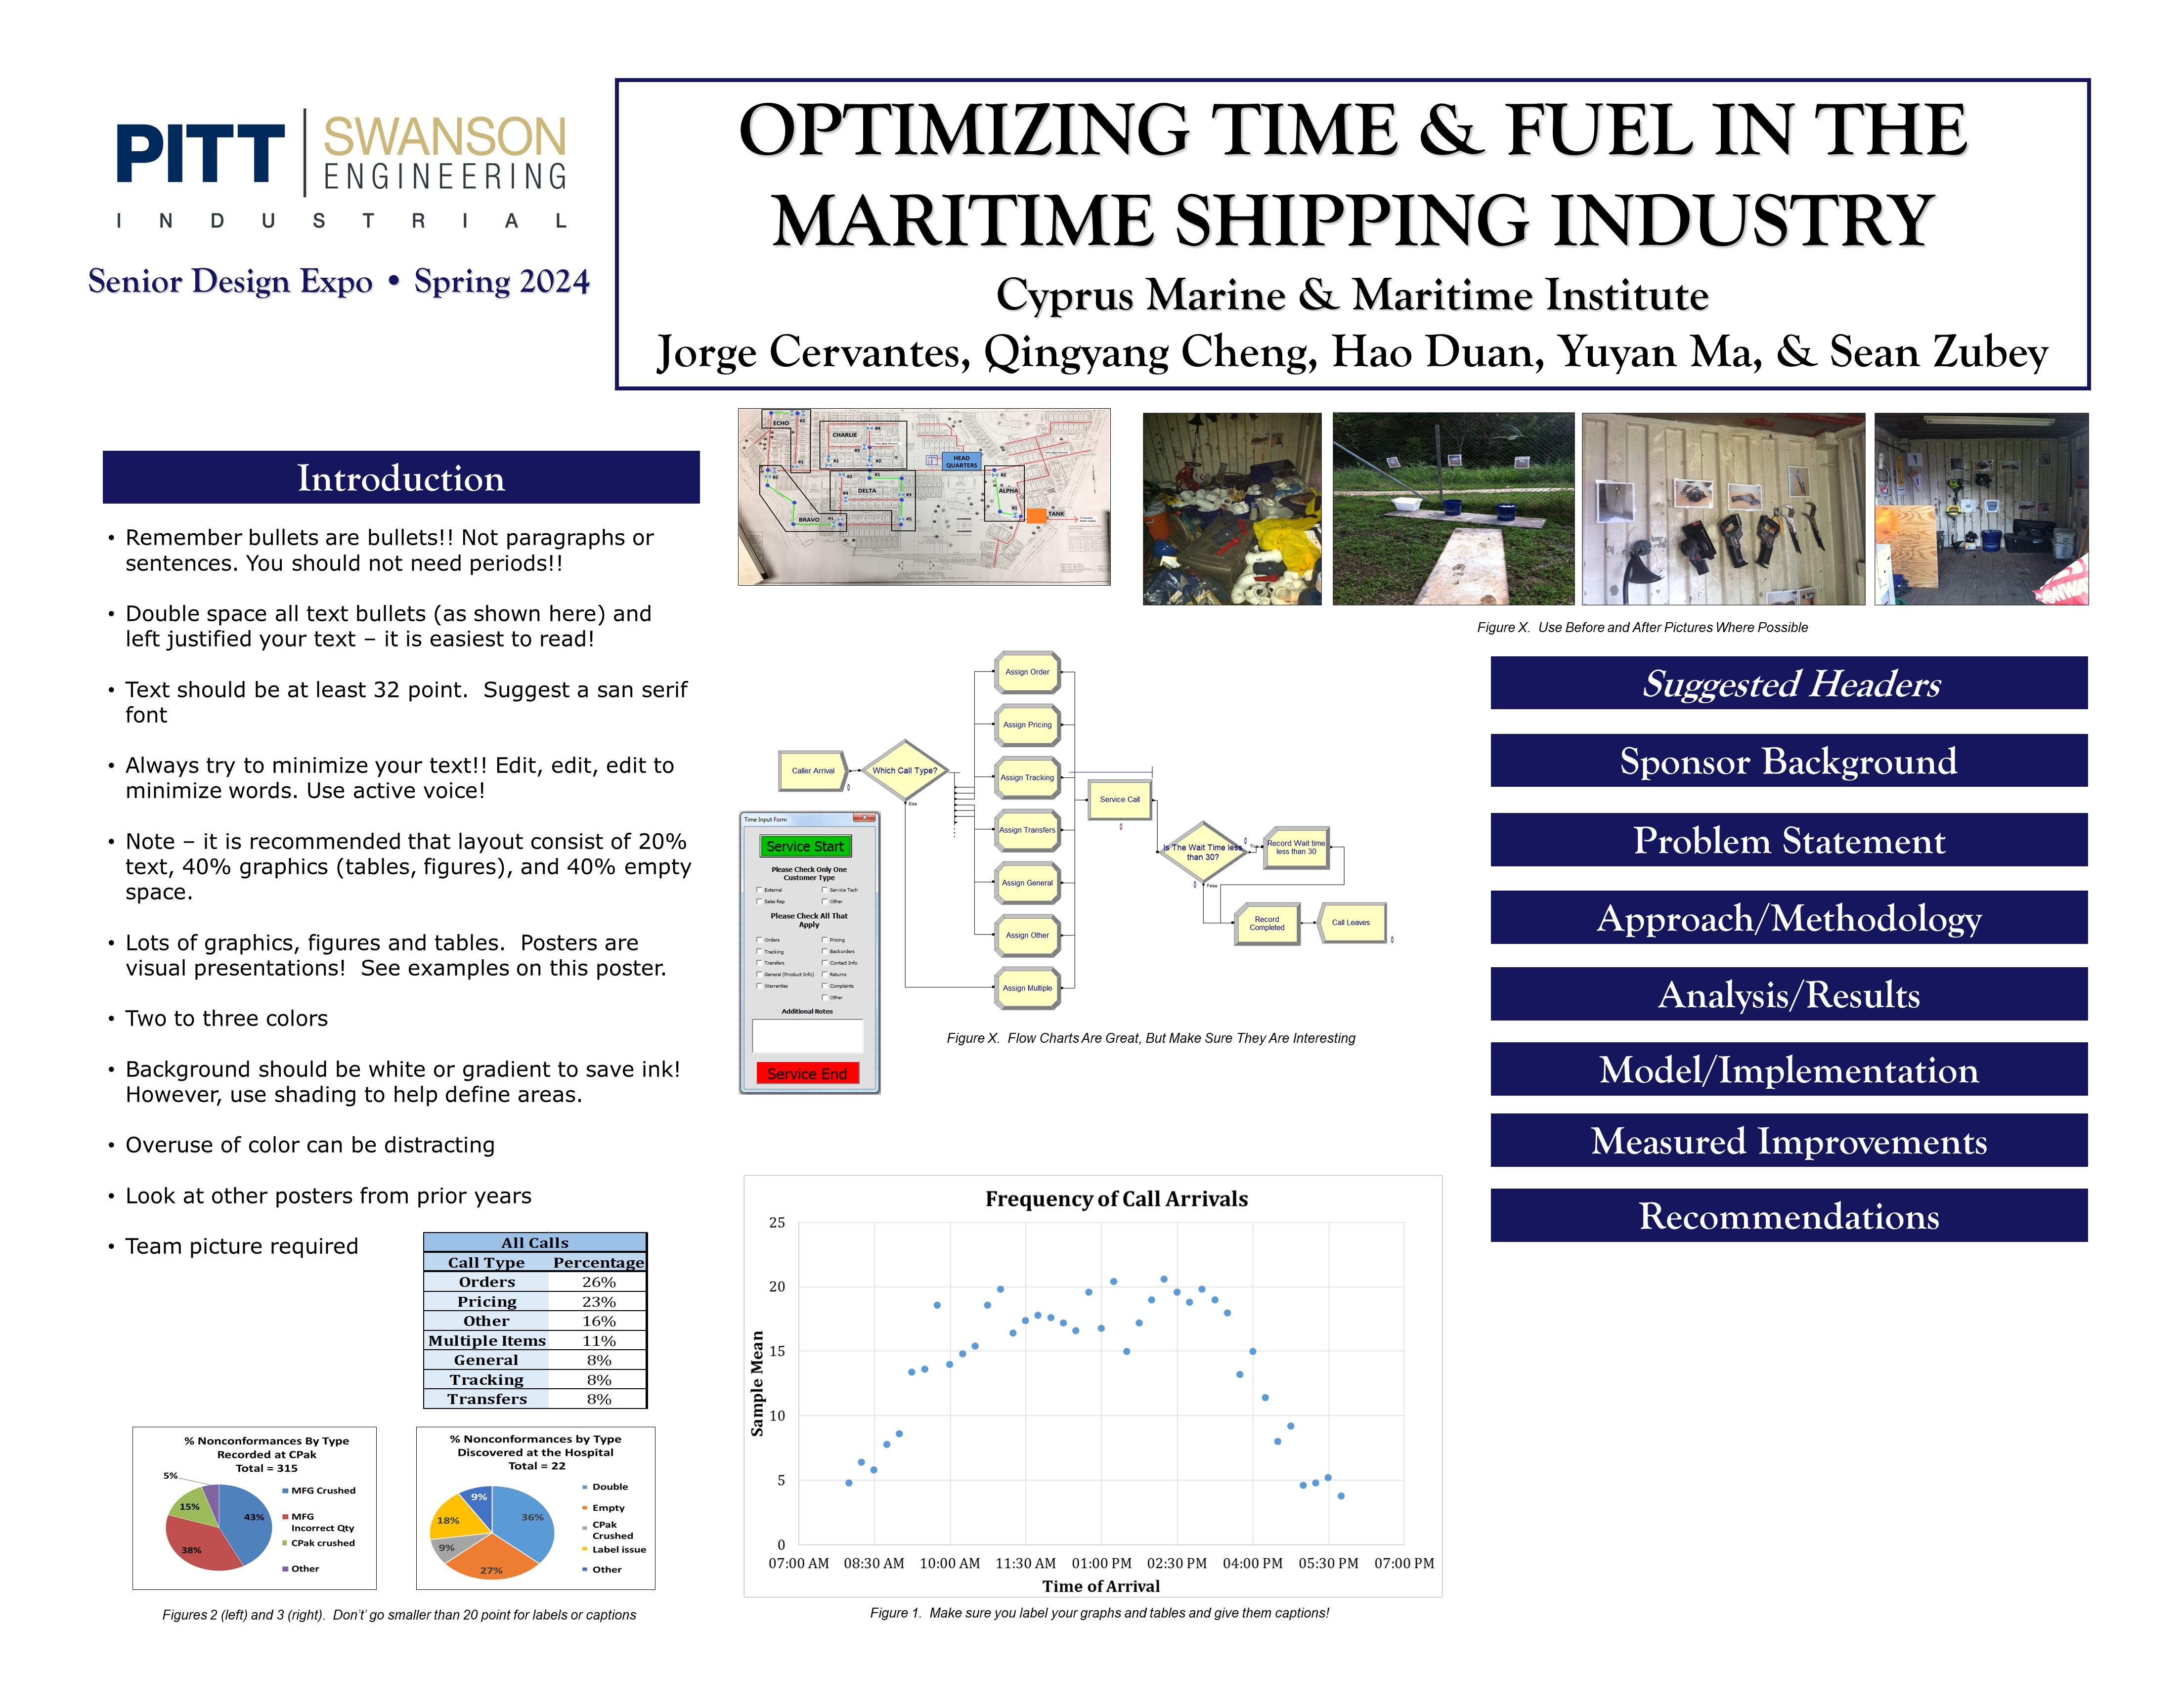 Optimizing time and fuel in the maritime shipping industry research poster showing overview of project